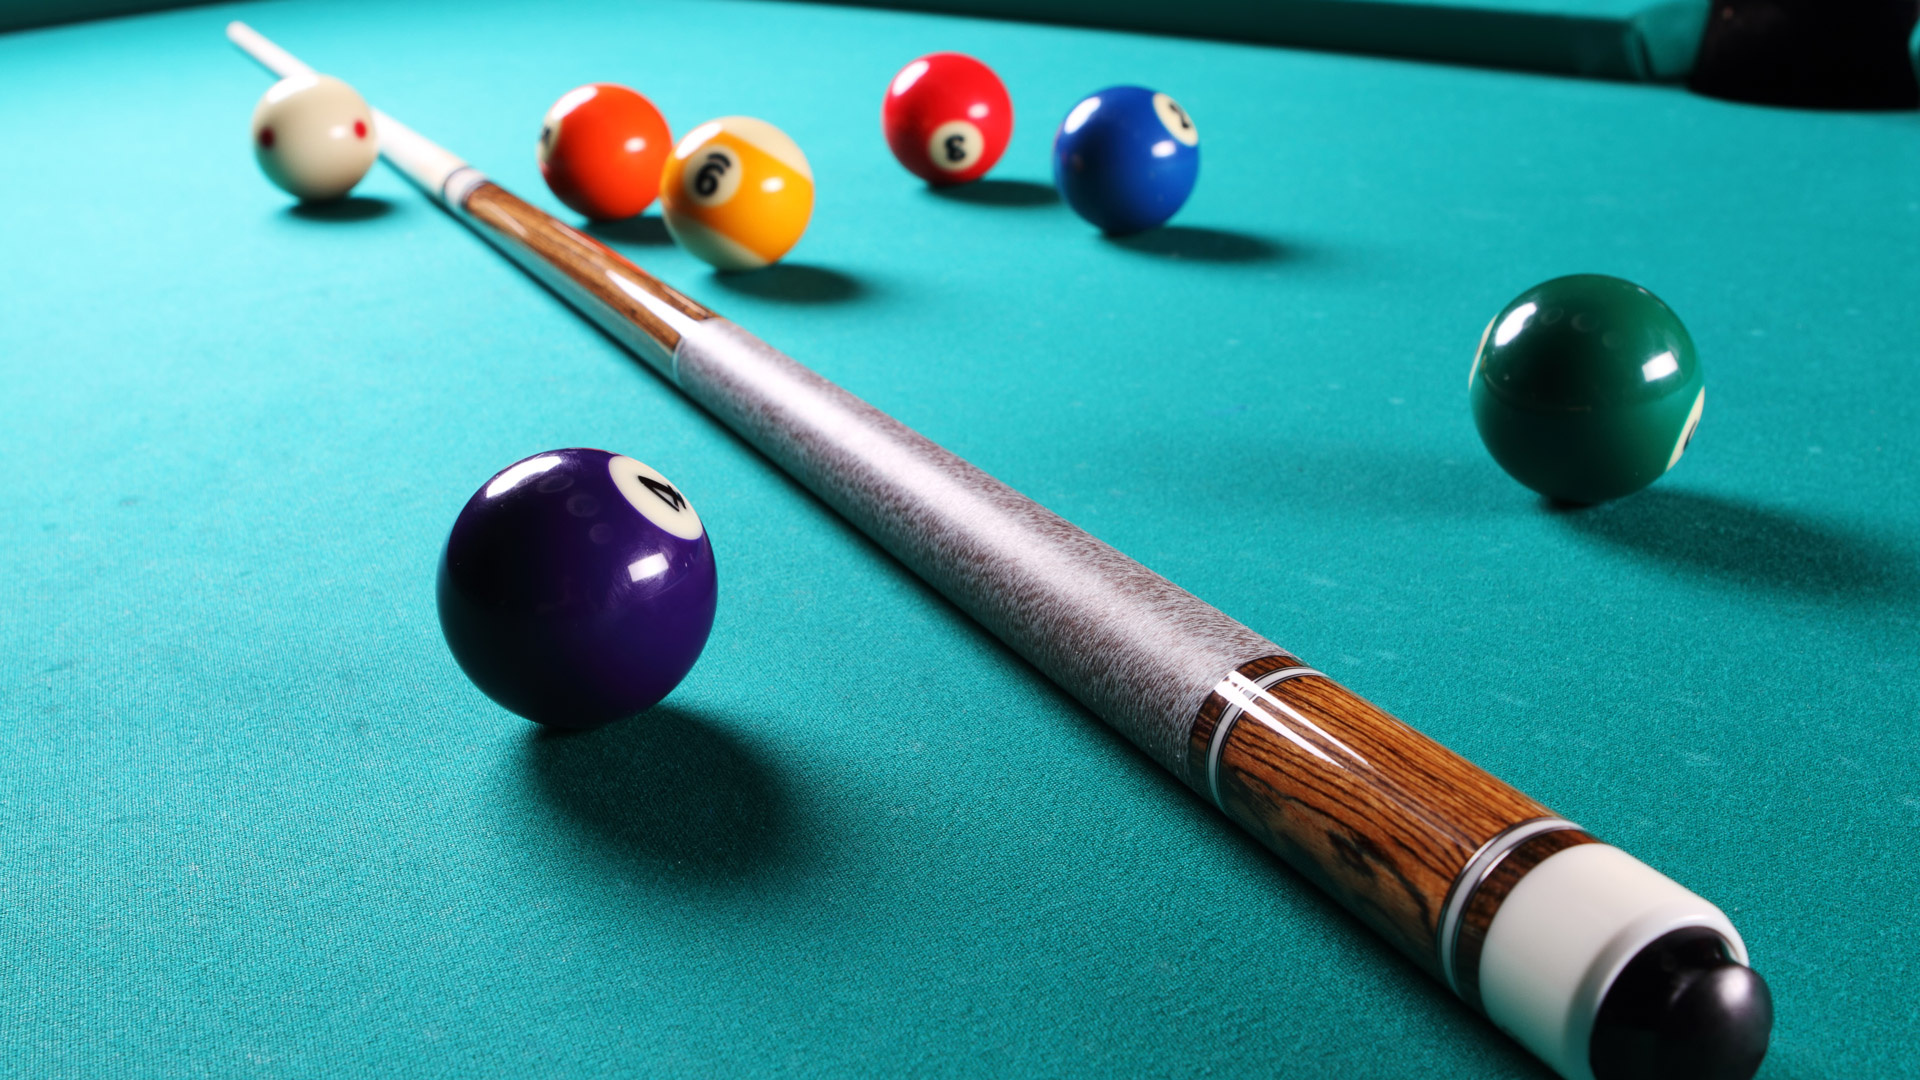 Billiards: Eight-ball cue game, The most common style played around the world by professionals. 1920x1080 Full HD Wallpaper.